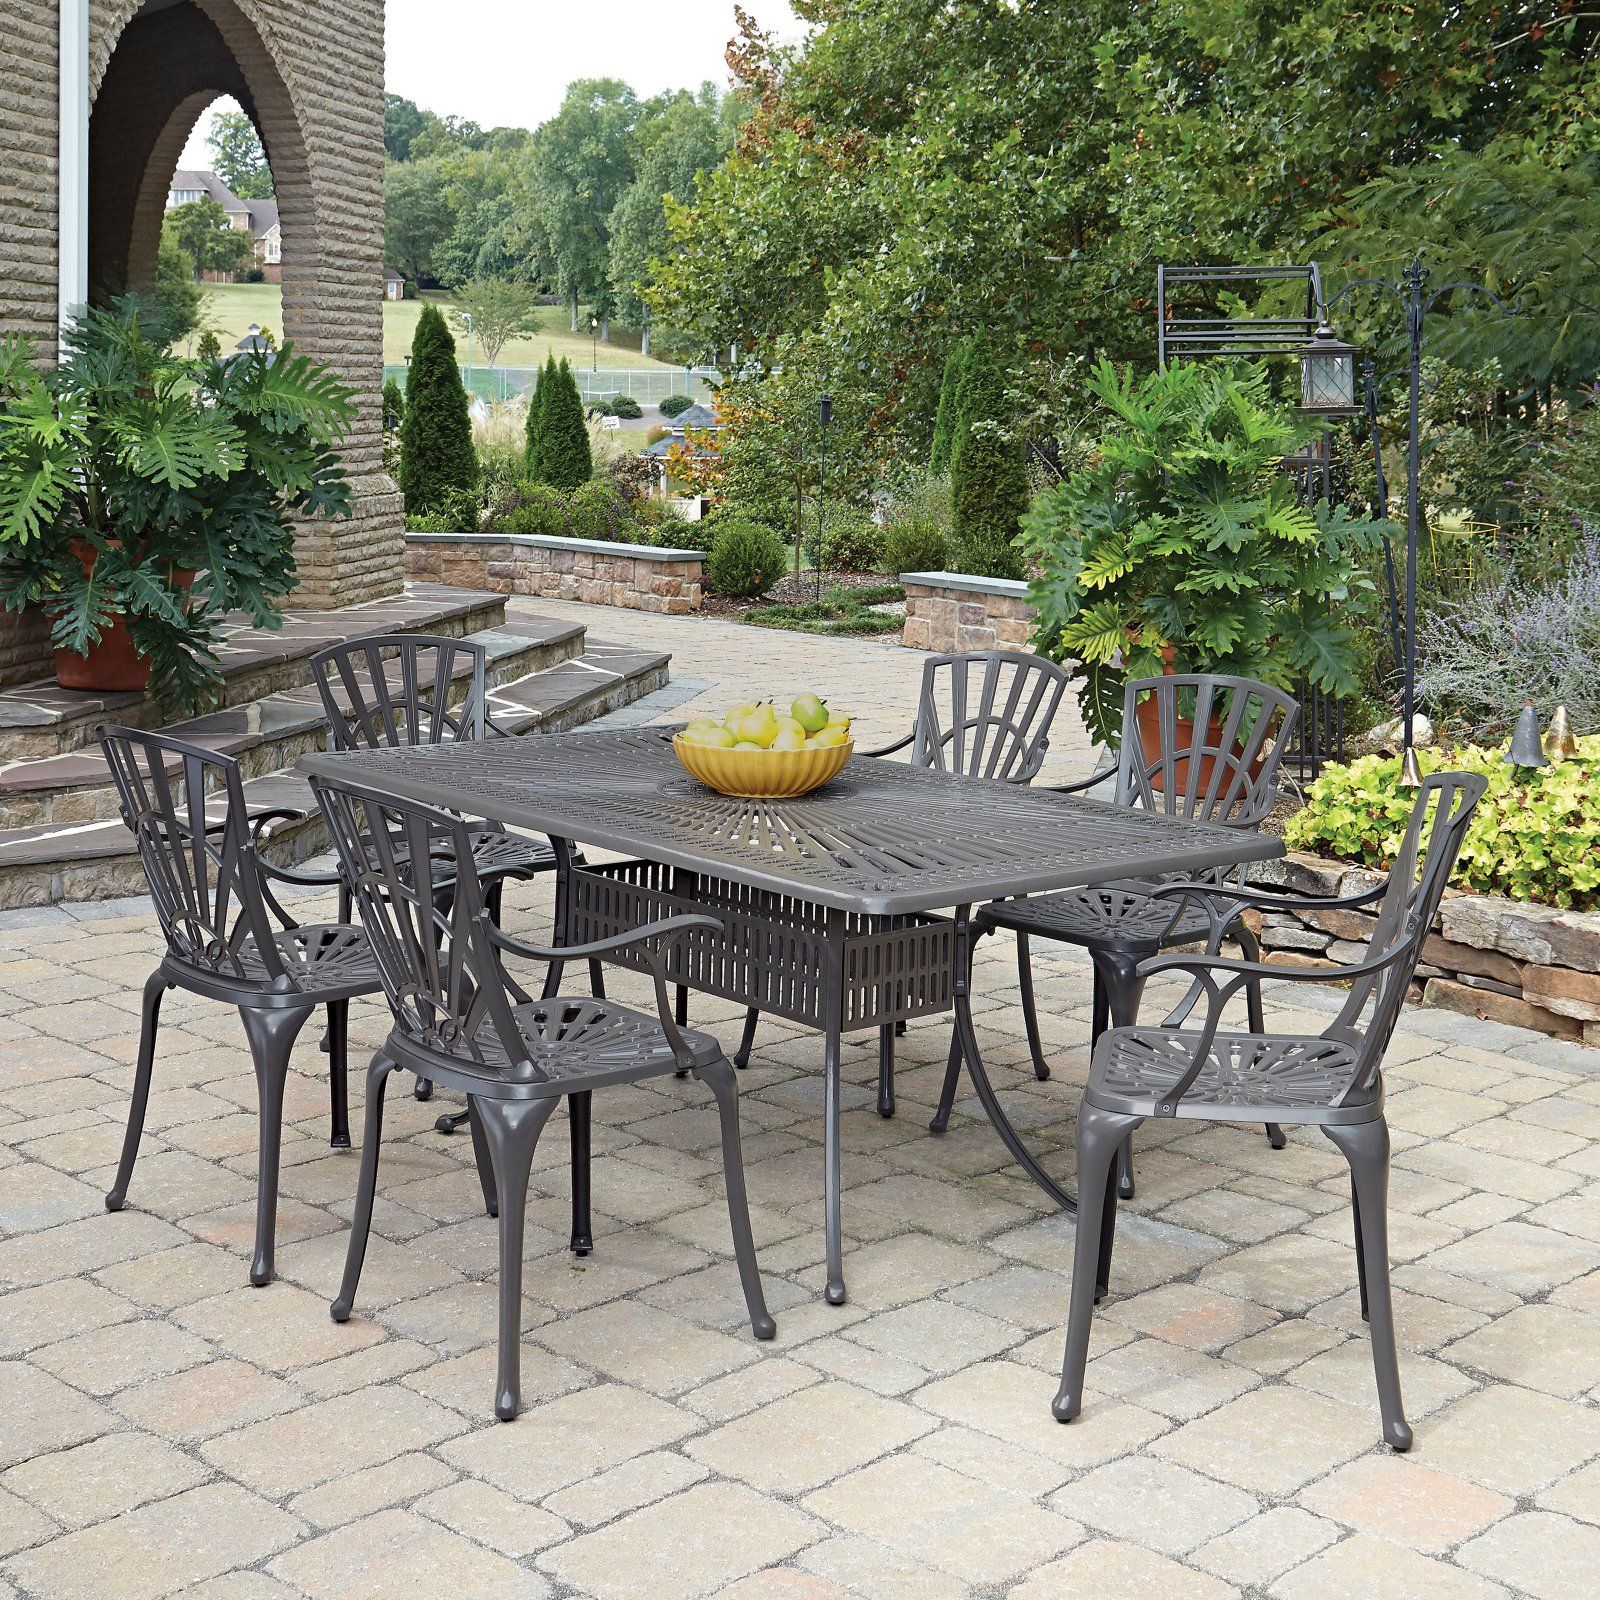 Rectangular Outdoor Patio Dining Sets Throughout Famous Home Styles Largo 7pc Outdoor Dining Set Includes Rectangular Table And (View 4 of 15)